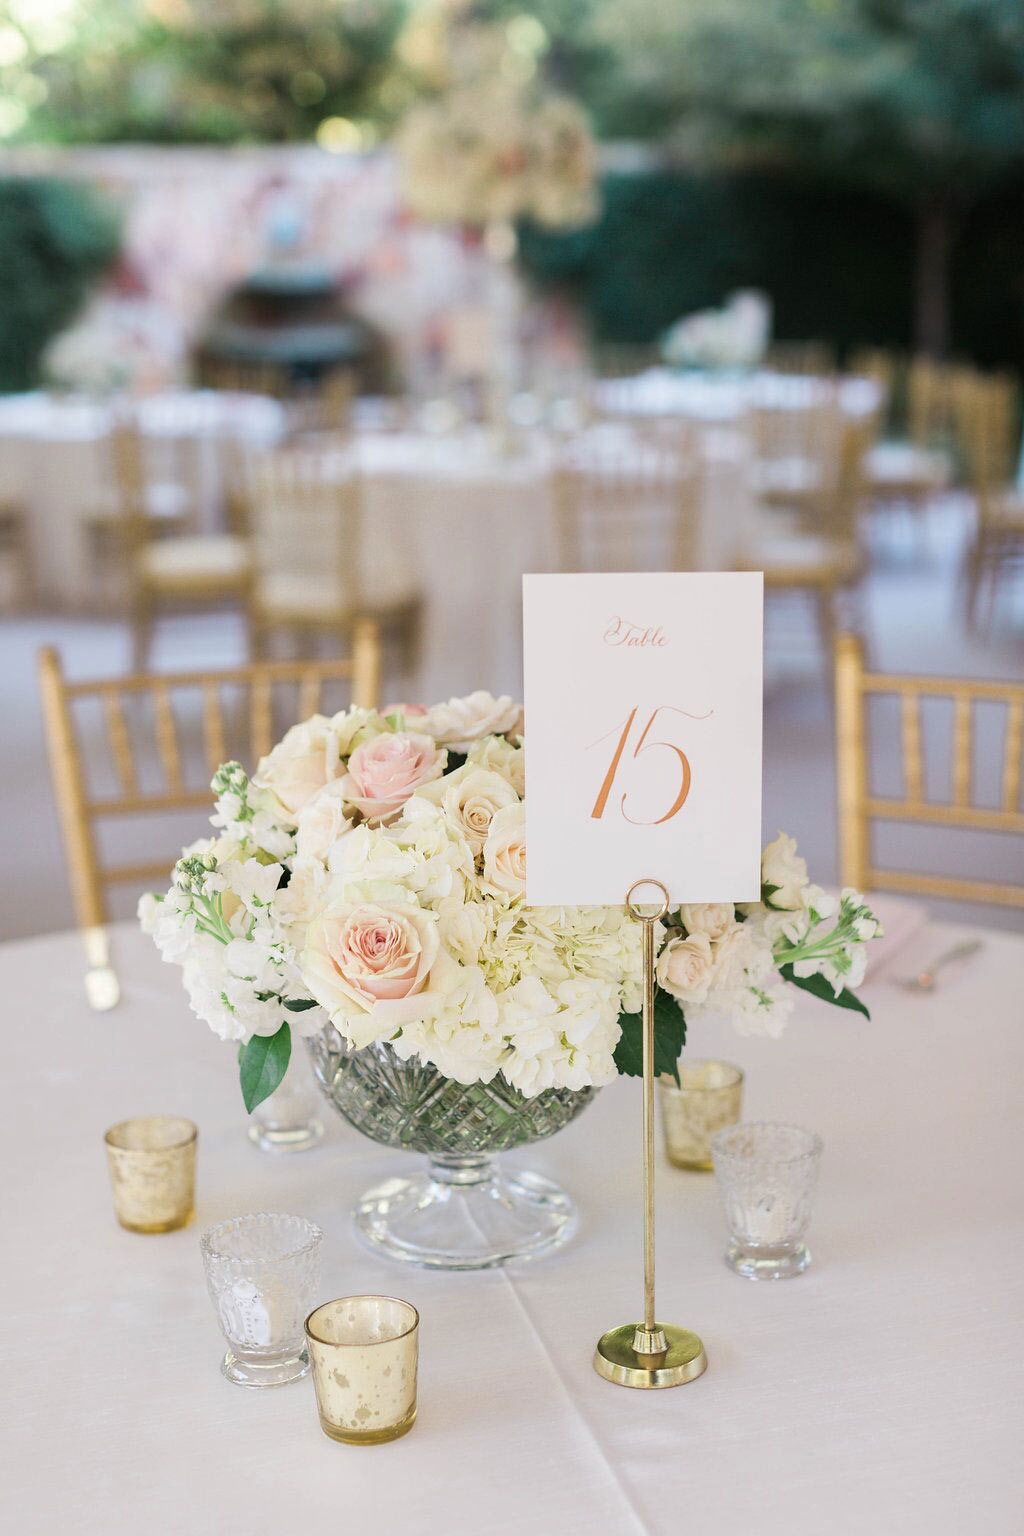 Low lush wedding centerpiece with gold calligraphy table number